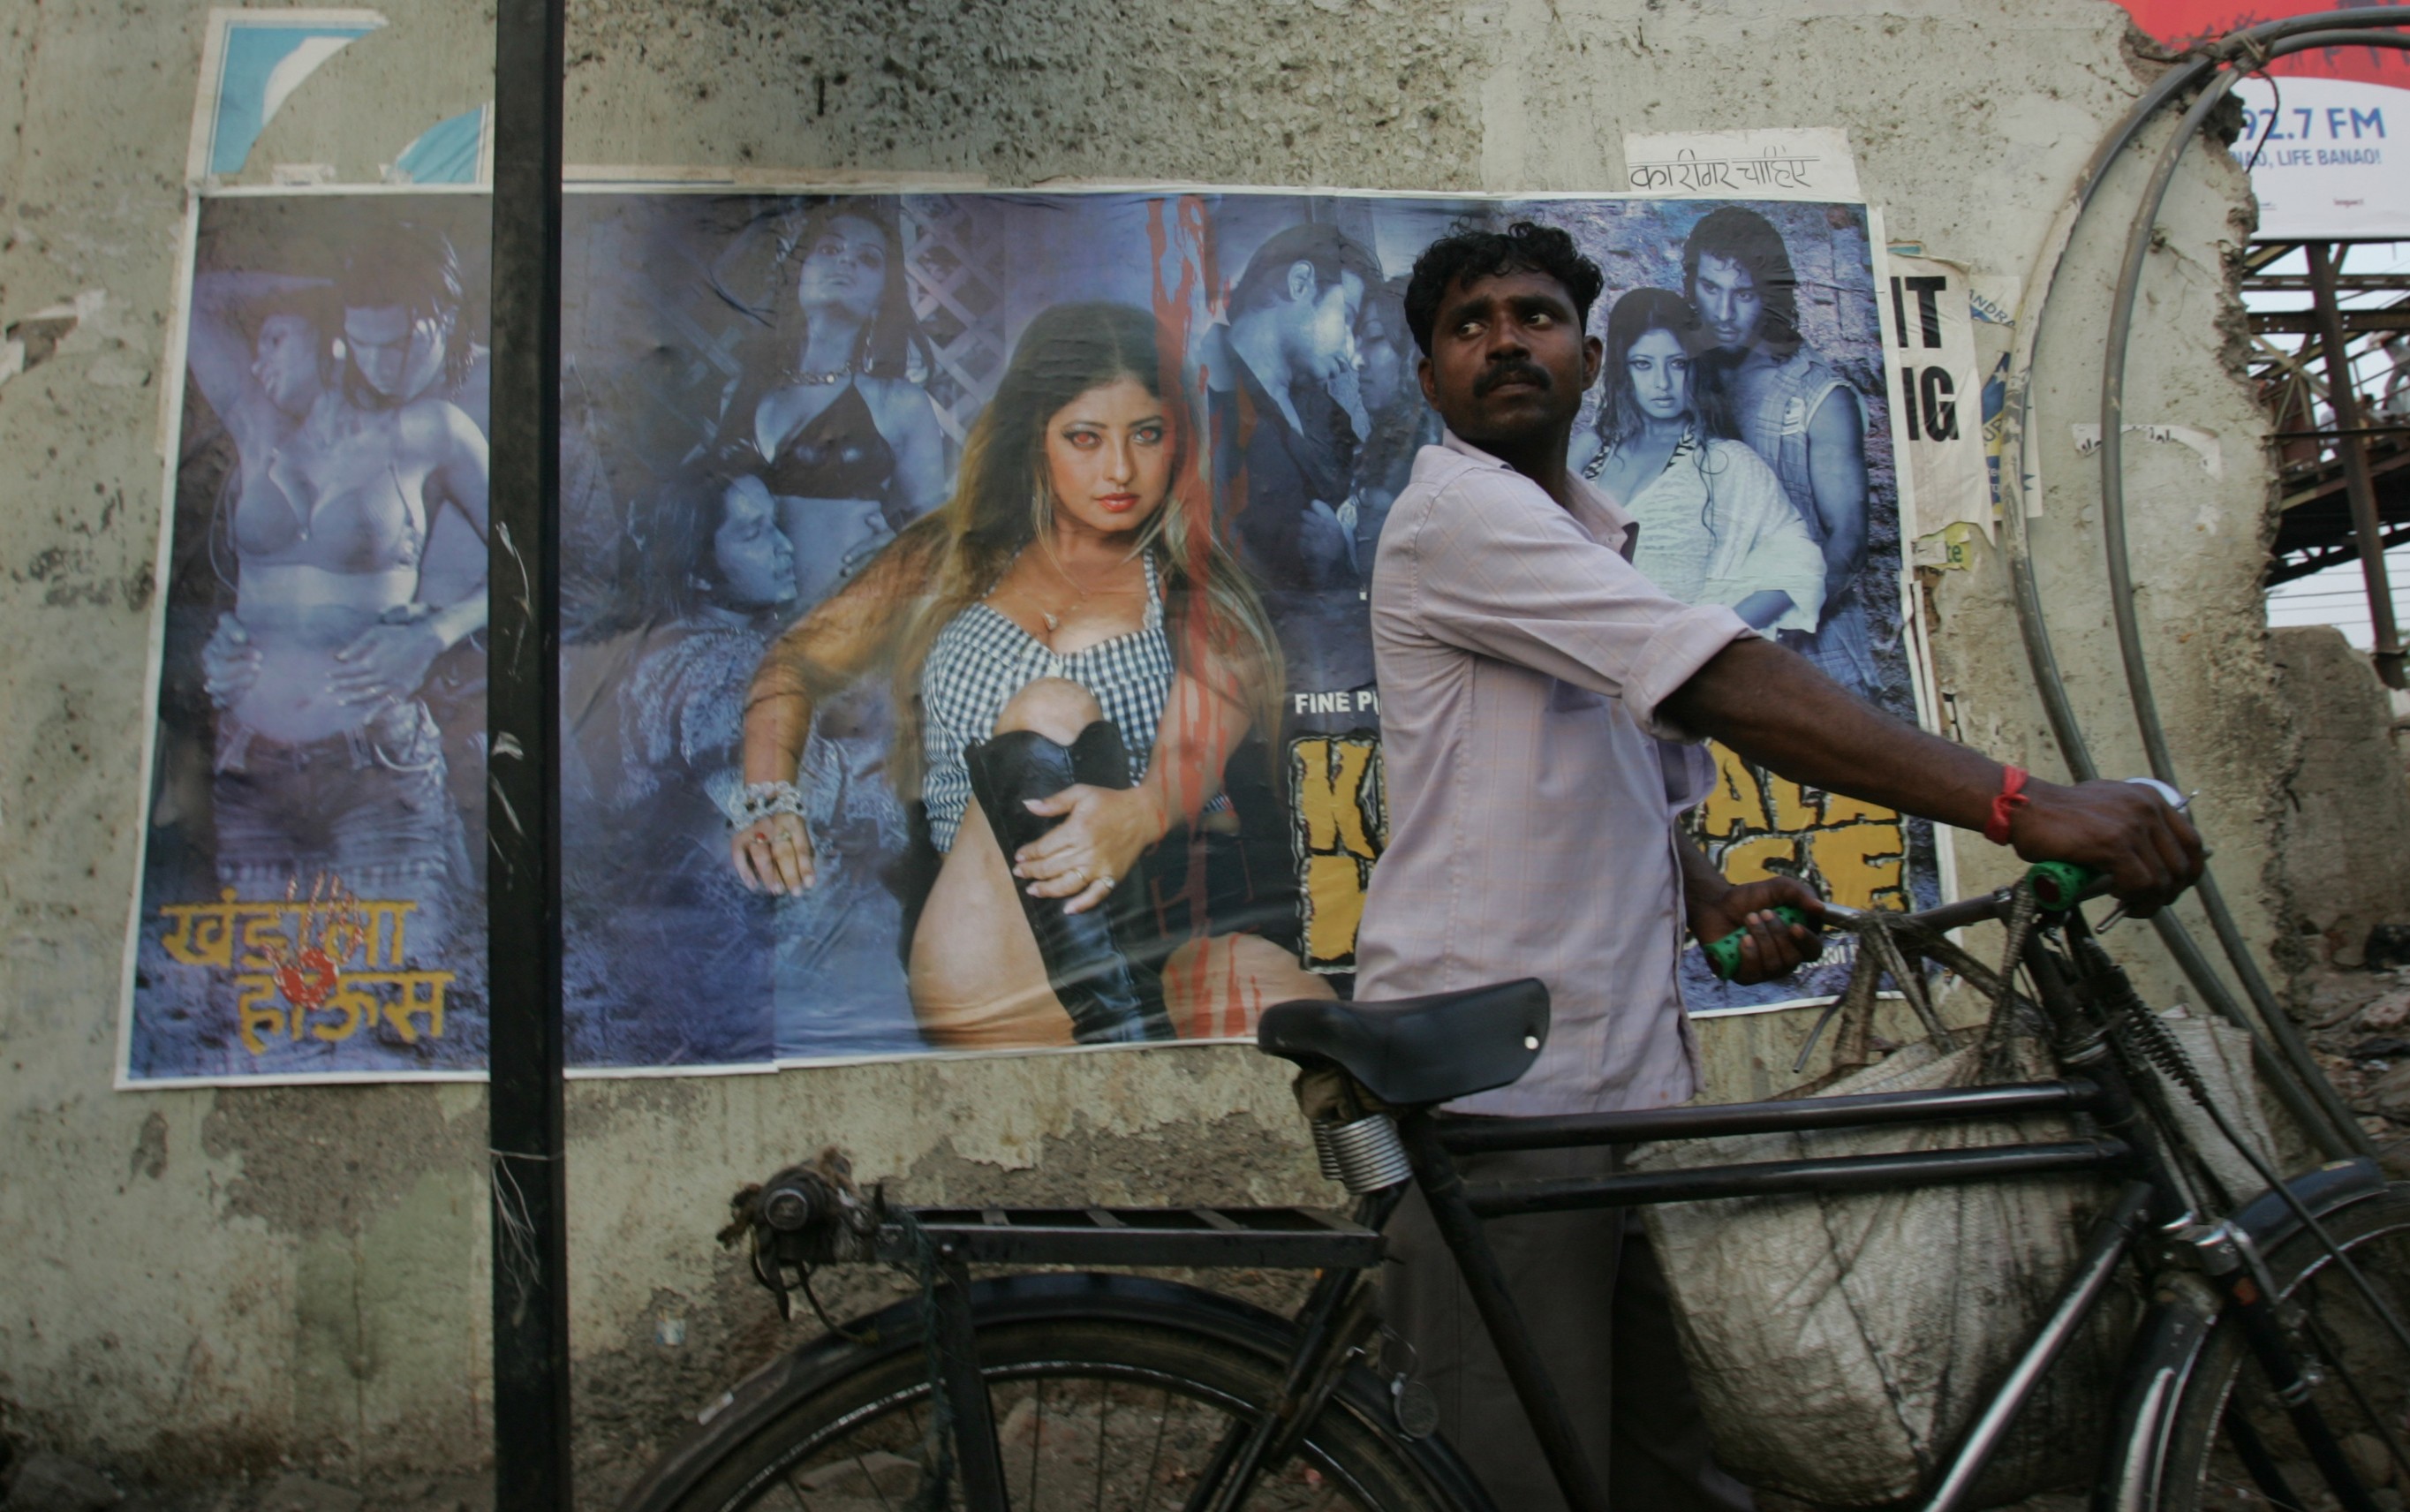 Meet the Leading Lady of India's Pulp Cinema